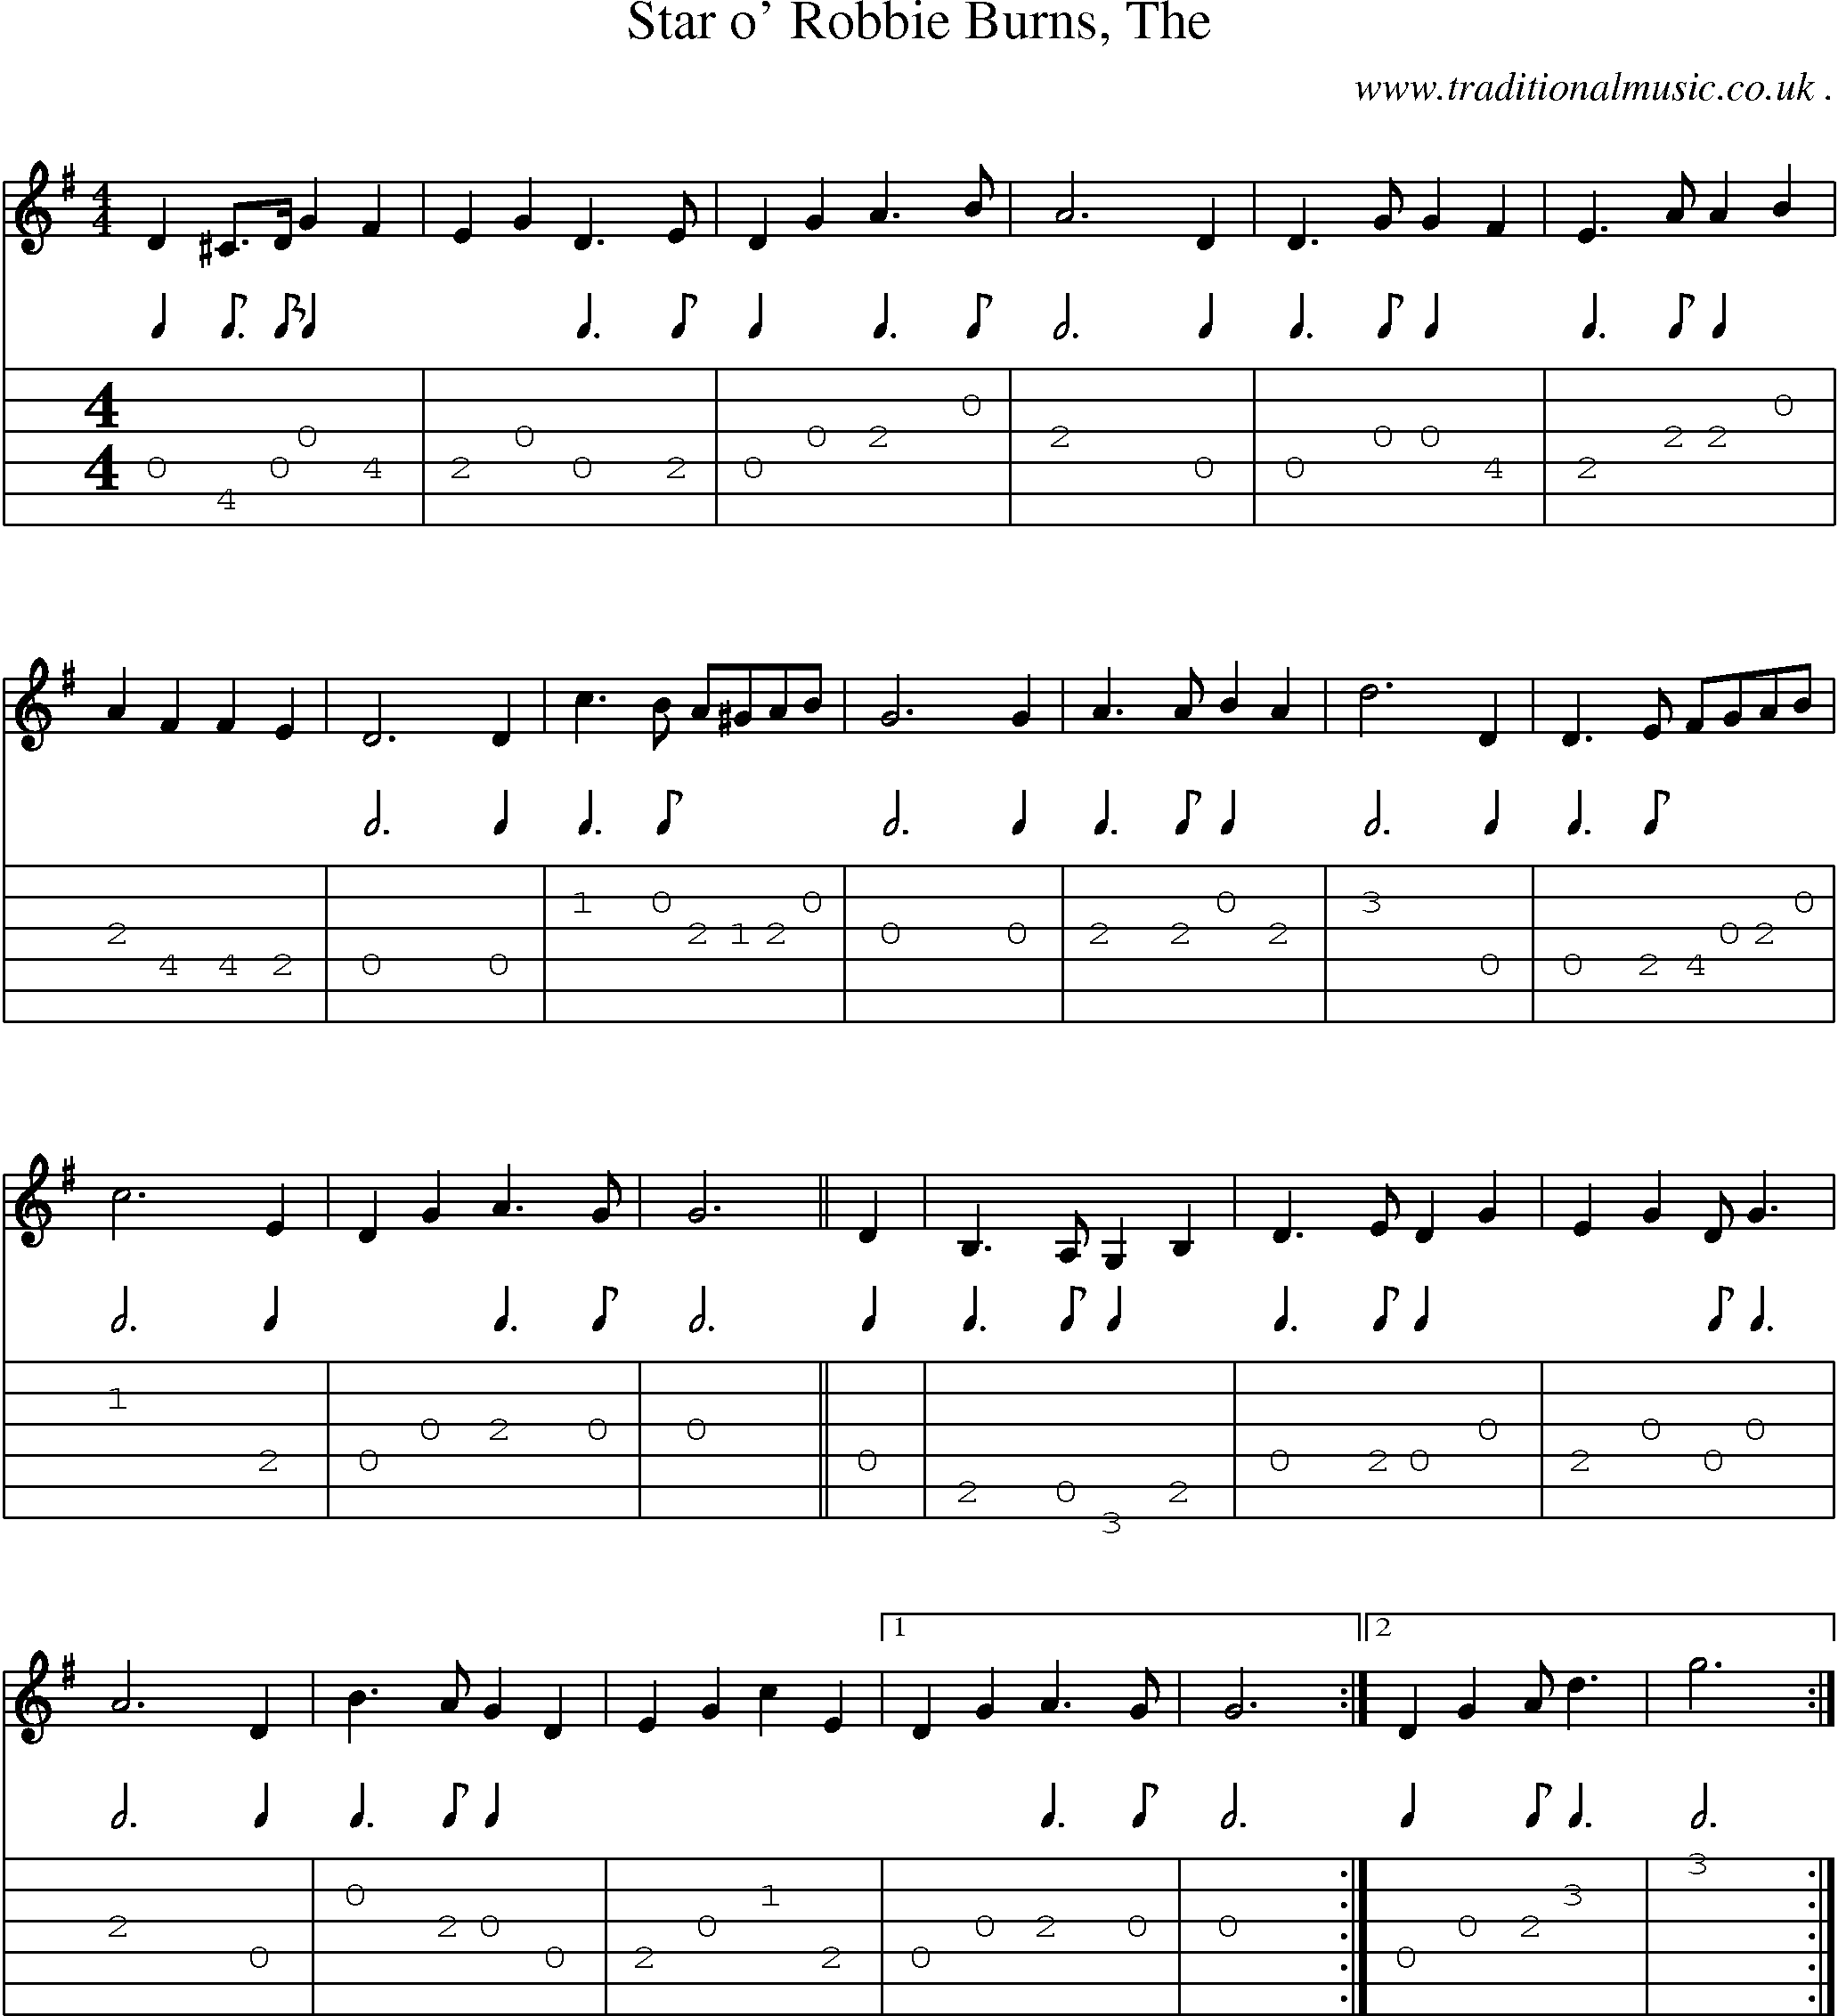 Sheet-music  score, Chords and Guitar Tabs for Star O Robbie Burns The